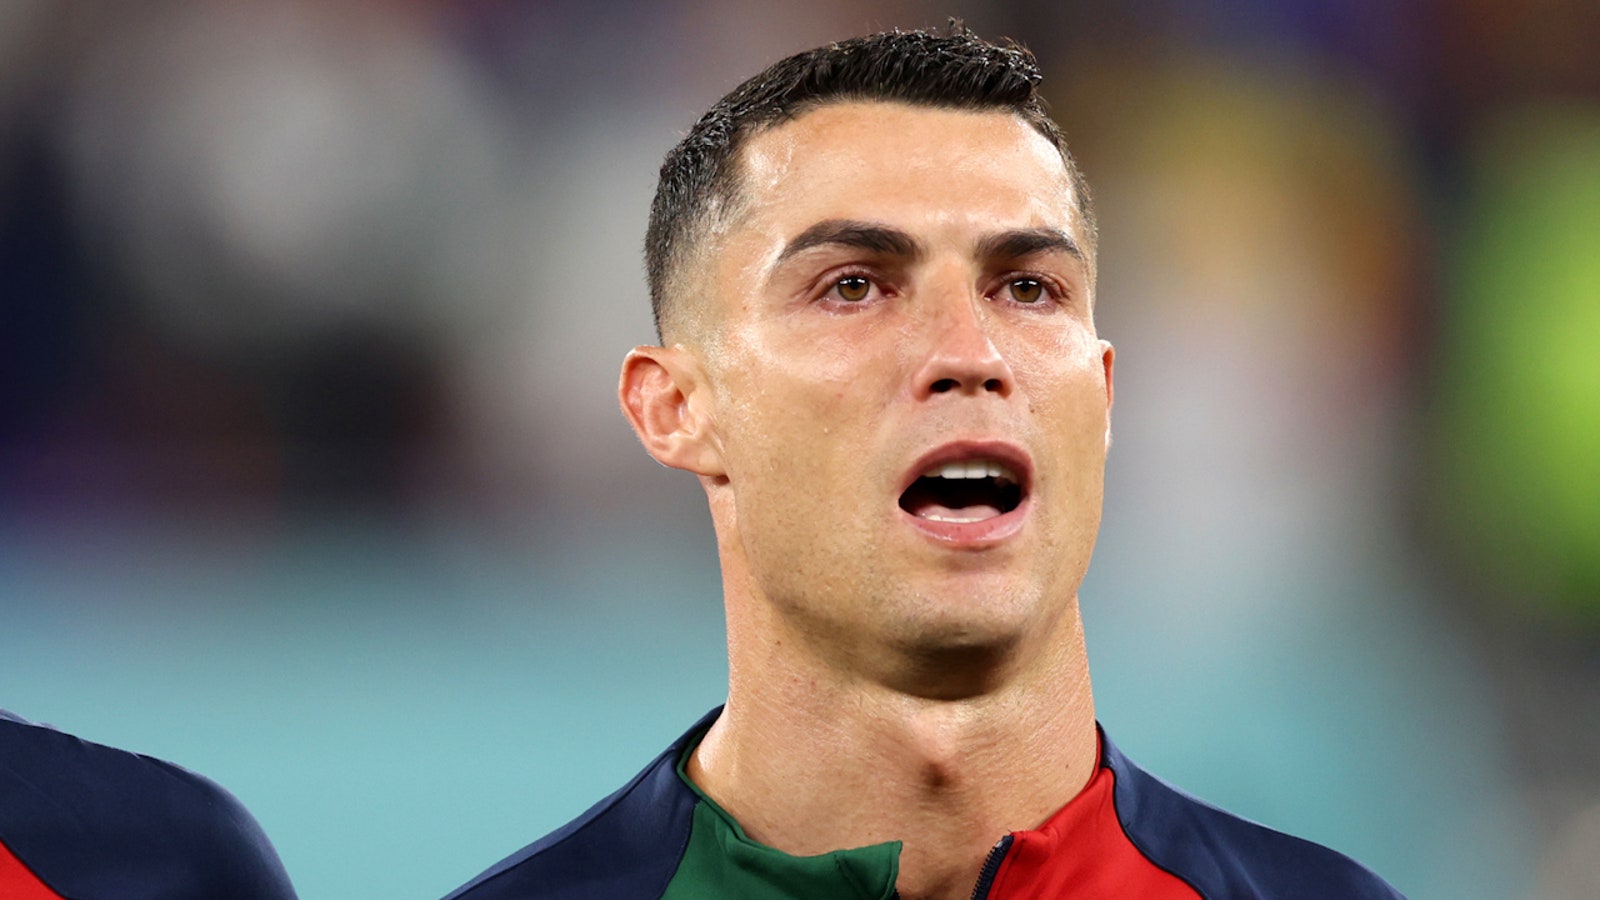 Cristiano Ronaldo's tears during the playing of the Portuguese national anthem